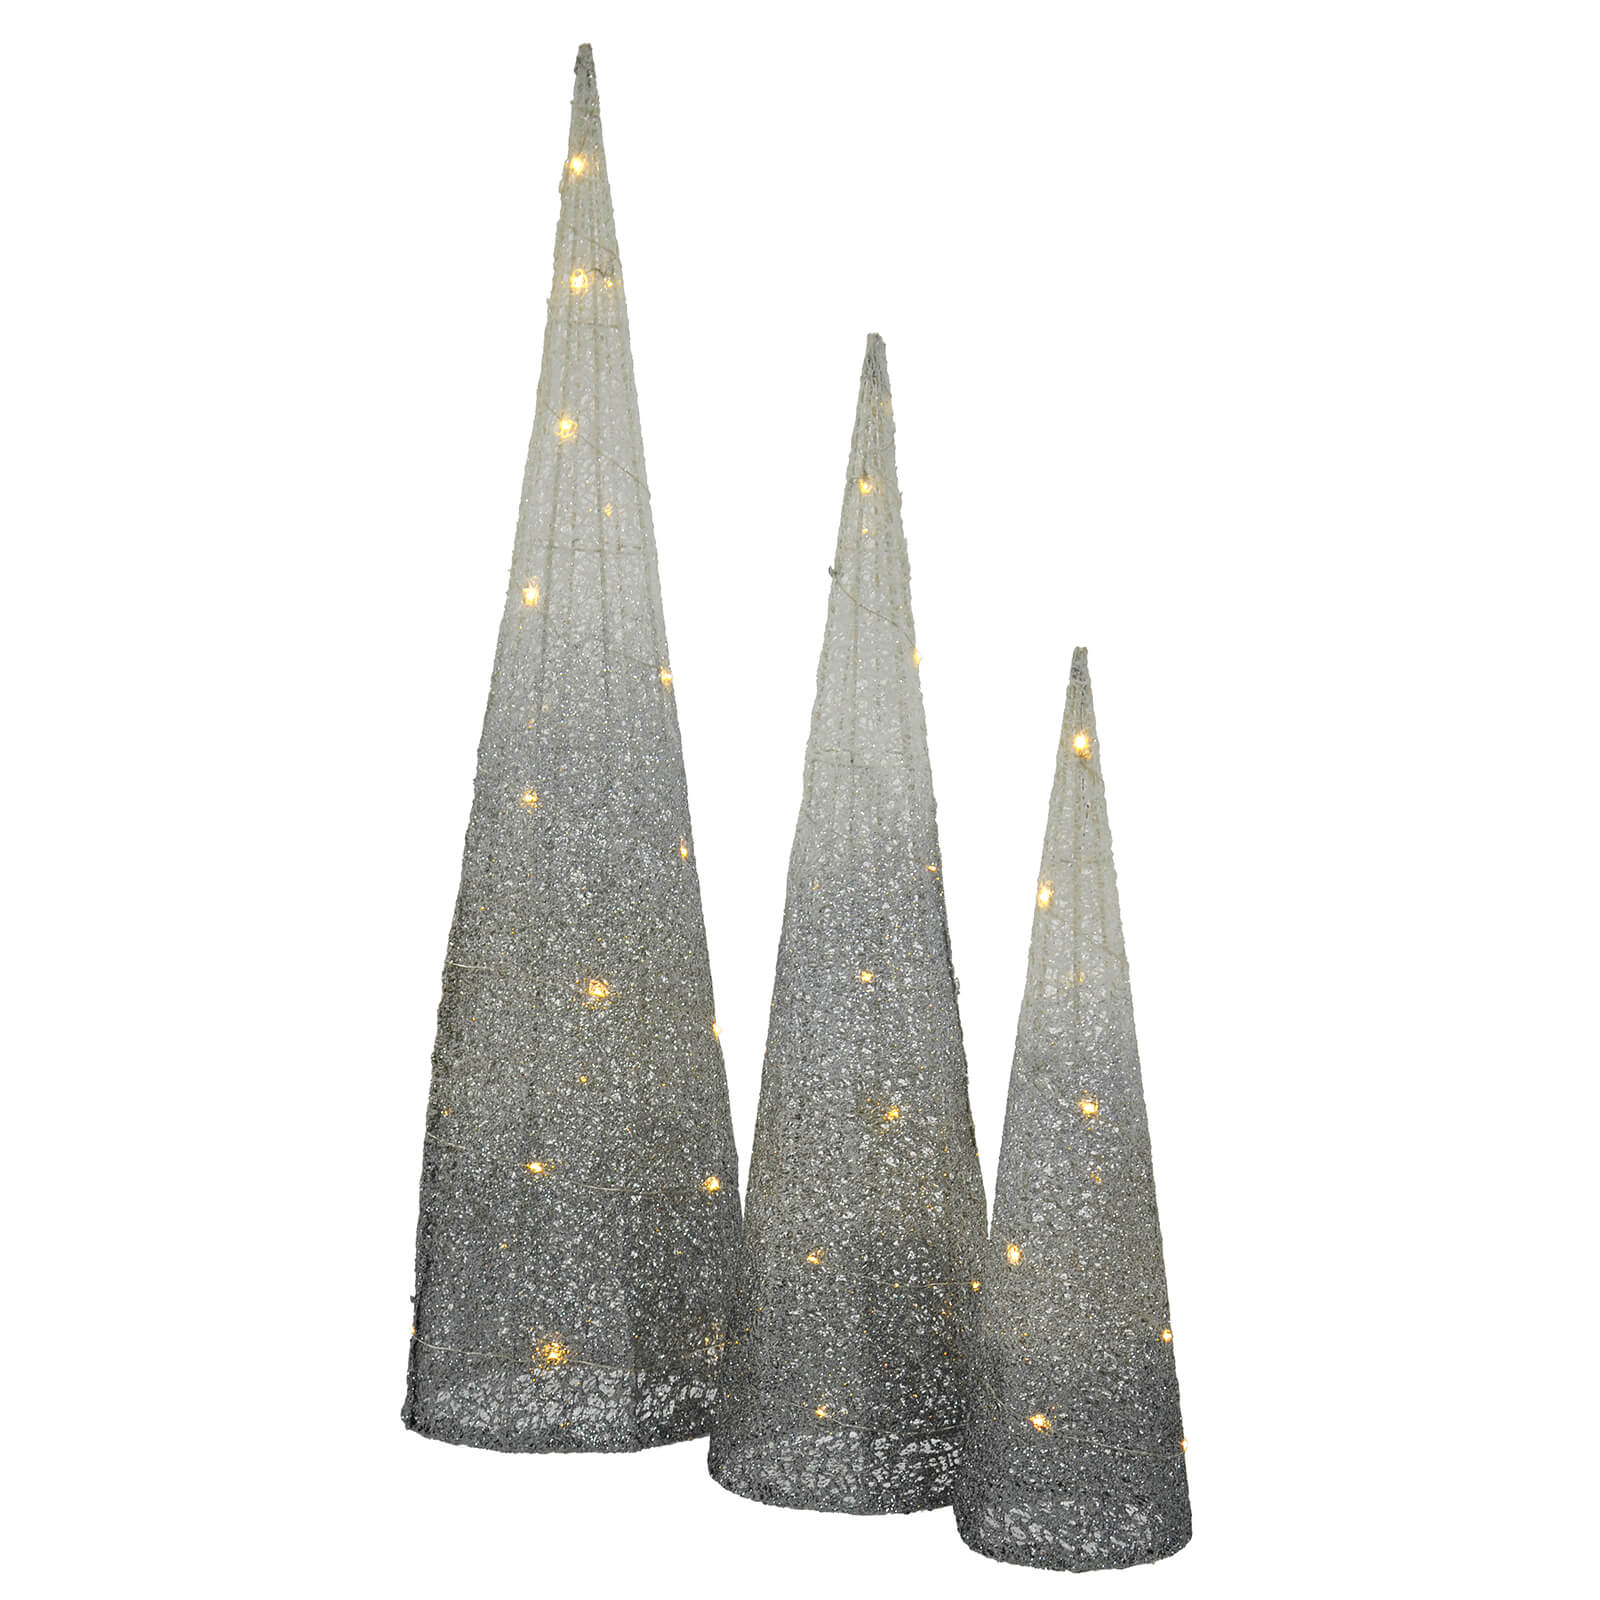 Set of 3 cone shape LED Christmas tree in silver to white ombre glitter mesh, and warm white LED lights on copper wire